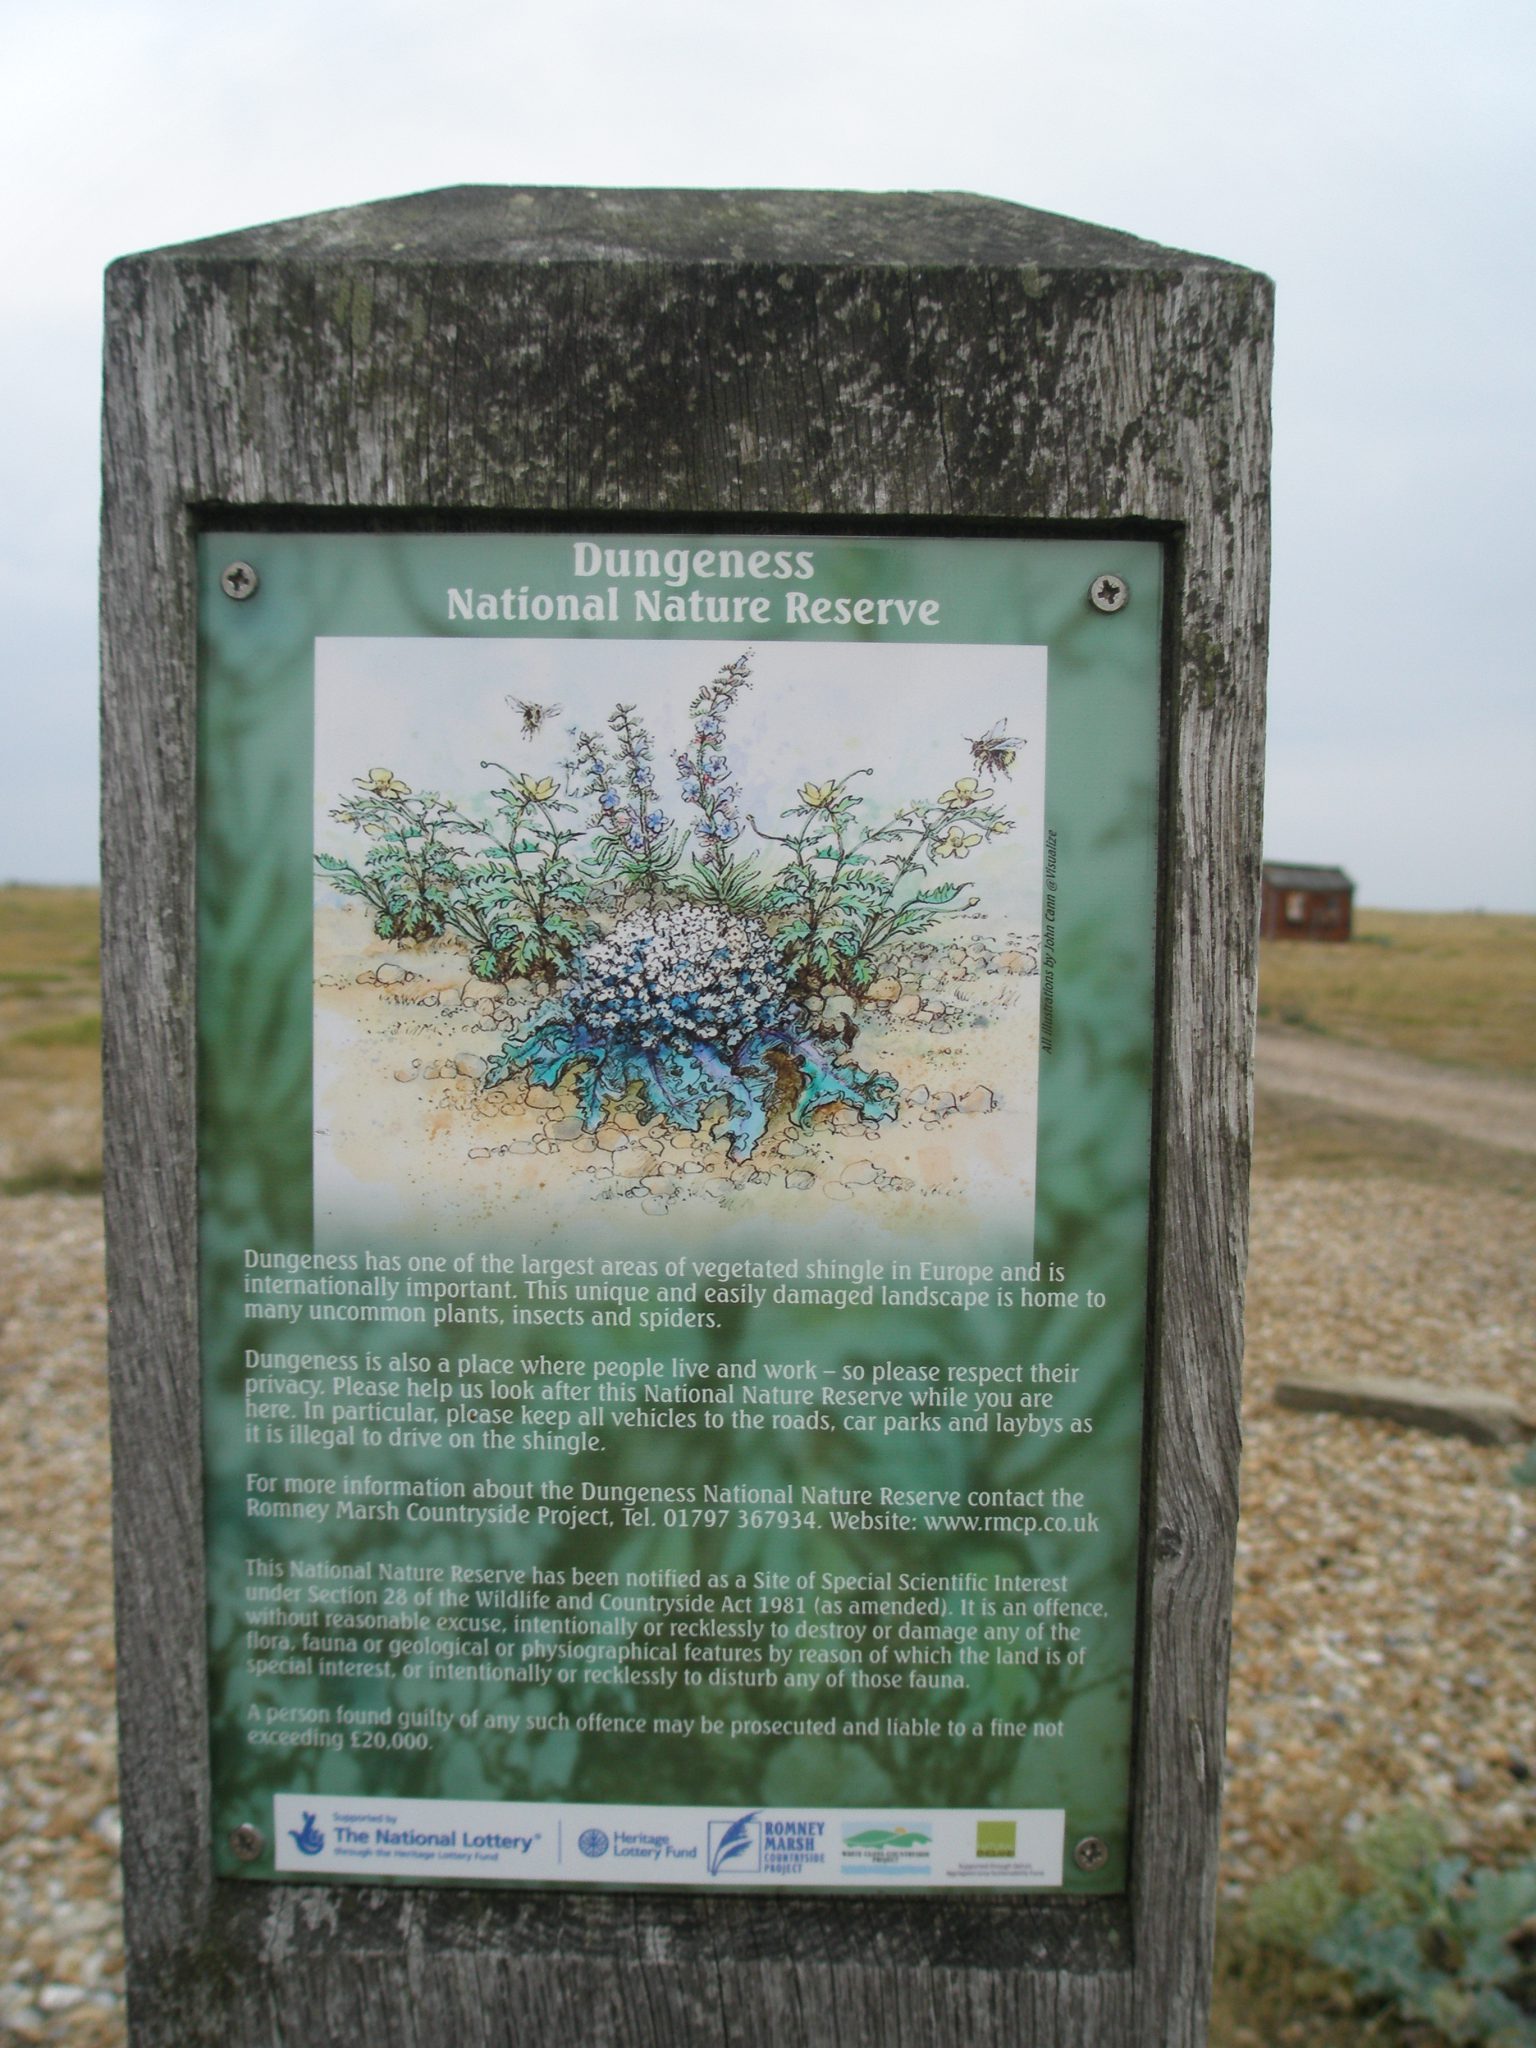 Sign for the National Nature Reserve, directly across the road from Derek Jarman's garden, on August 7, 2013.